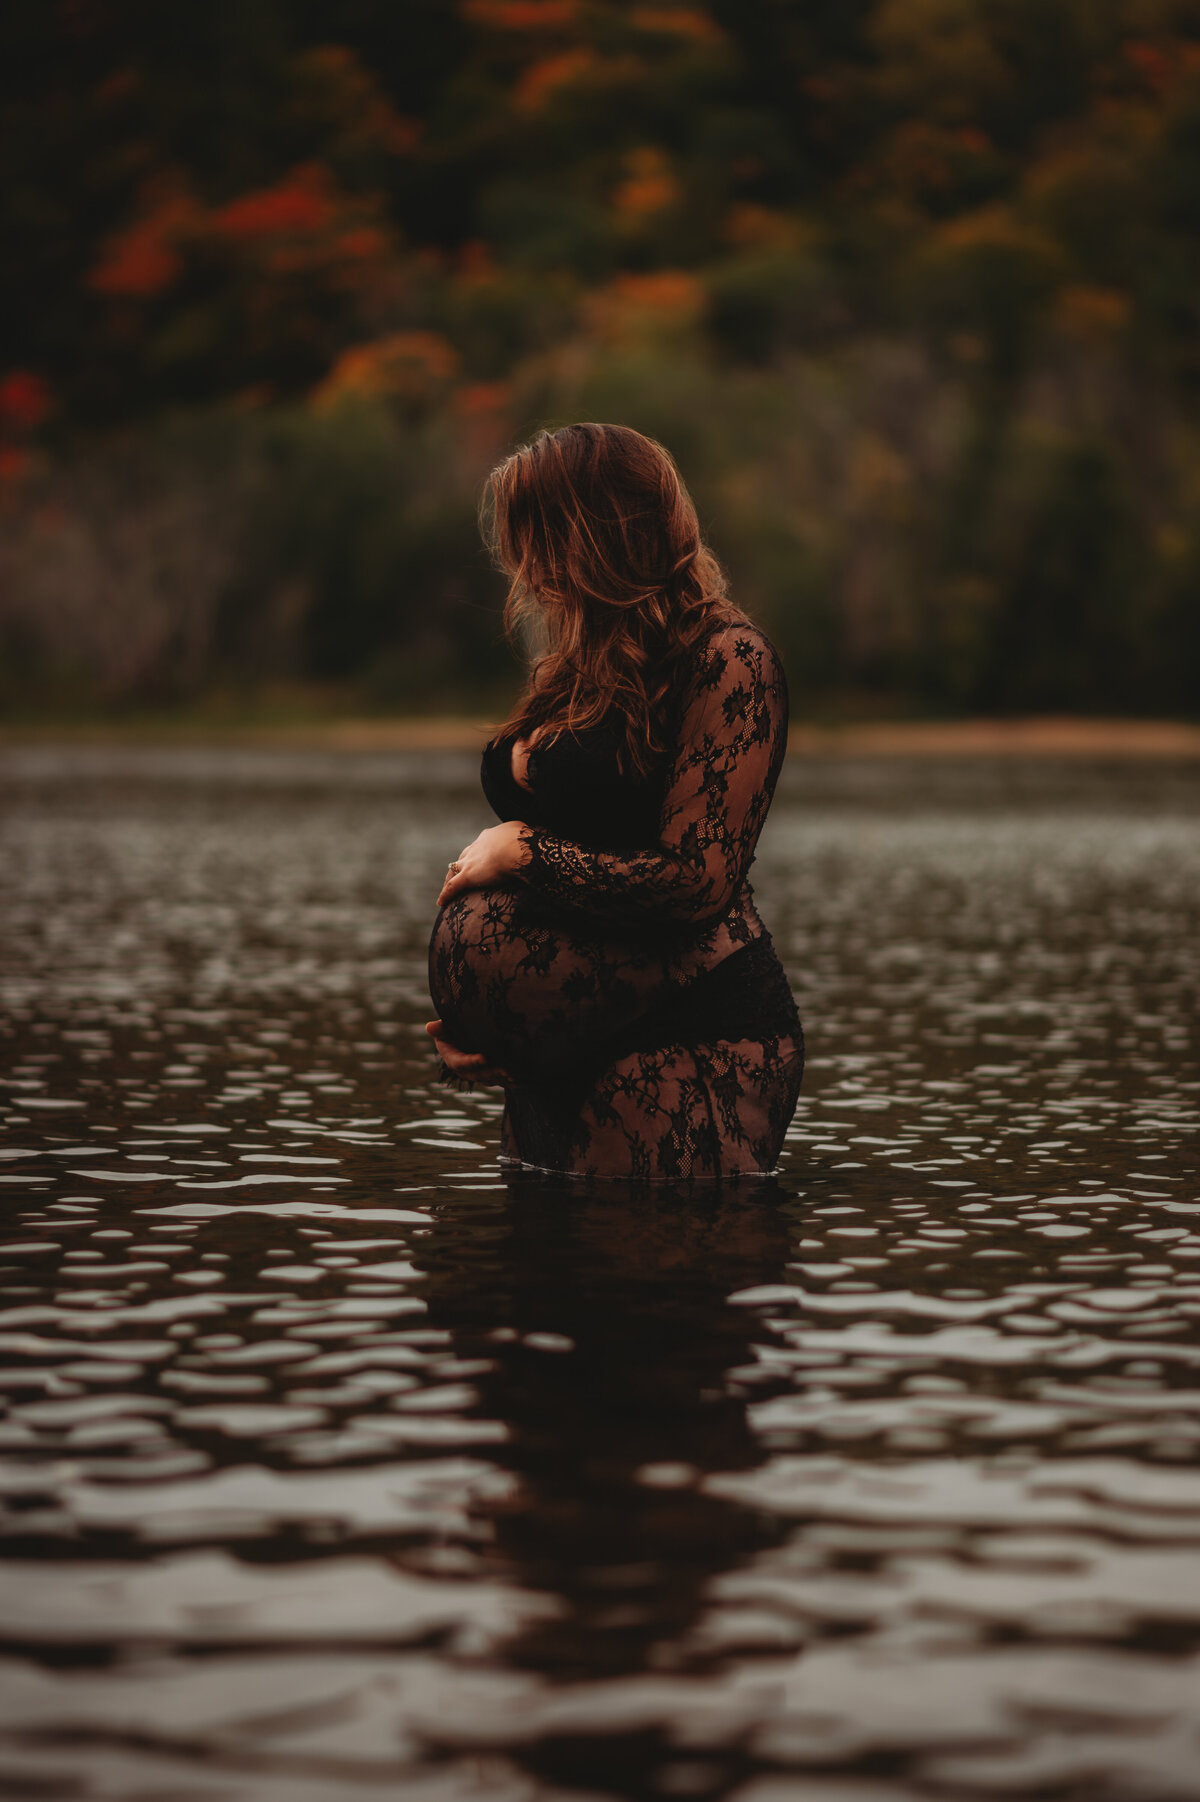 Radiate with lakeside glow in our outdoor maternity sessions. Shannon Kathleen Photography paints the radiance of your expectant journey. Secure your session for glowing memories